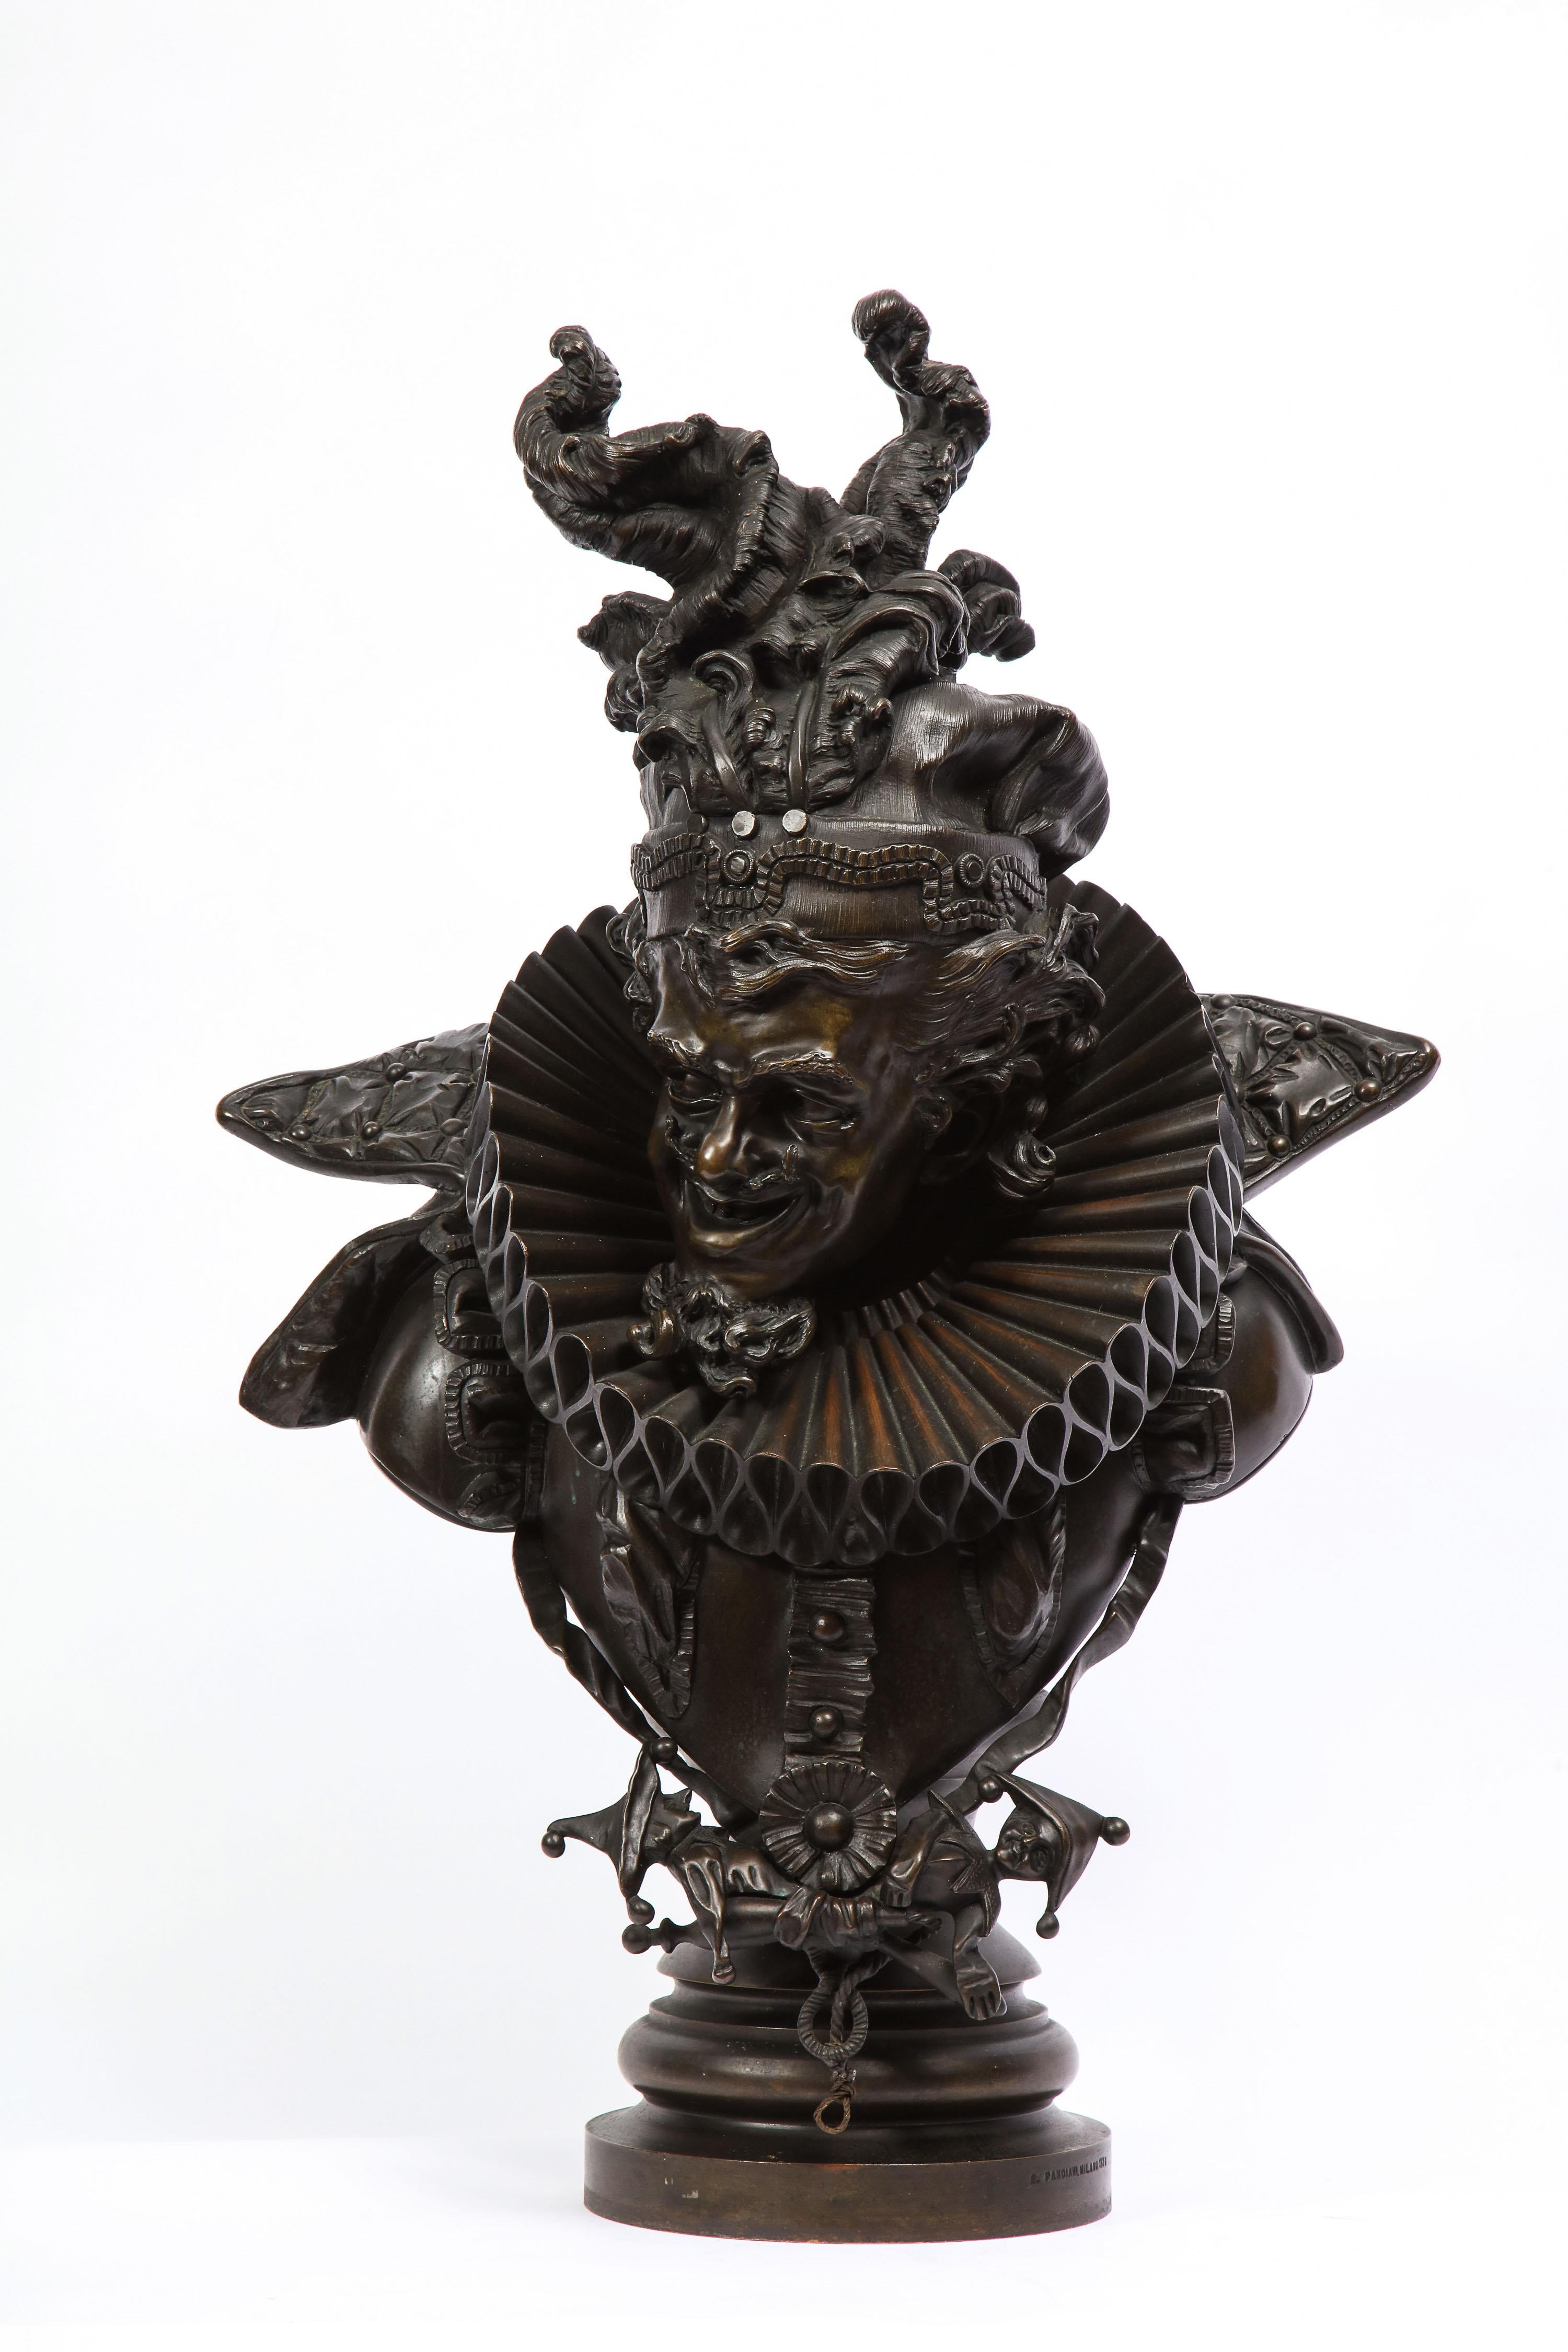 A Fabulous and Large Louis XVI Style Patinated Bronze Bust of a Court Jester, Stamped A. PANDIANI.MILANO 1888. Antonio Pandiani did an exceptional job at casting this truly remarkable bronze bust. The detail of the face, clothes, head-gear and